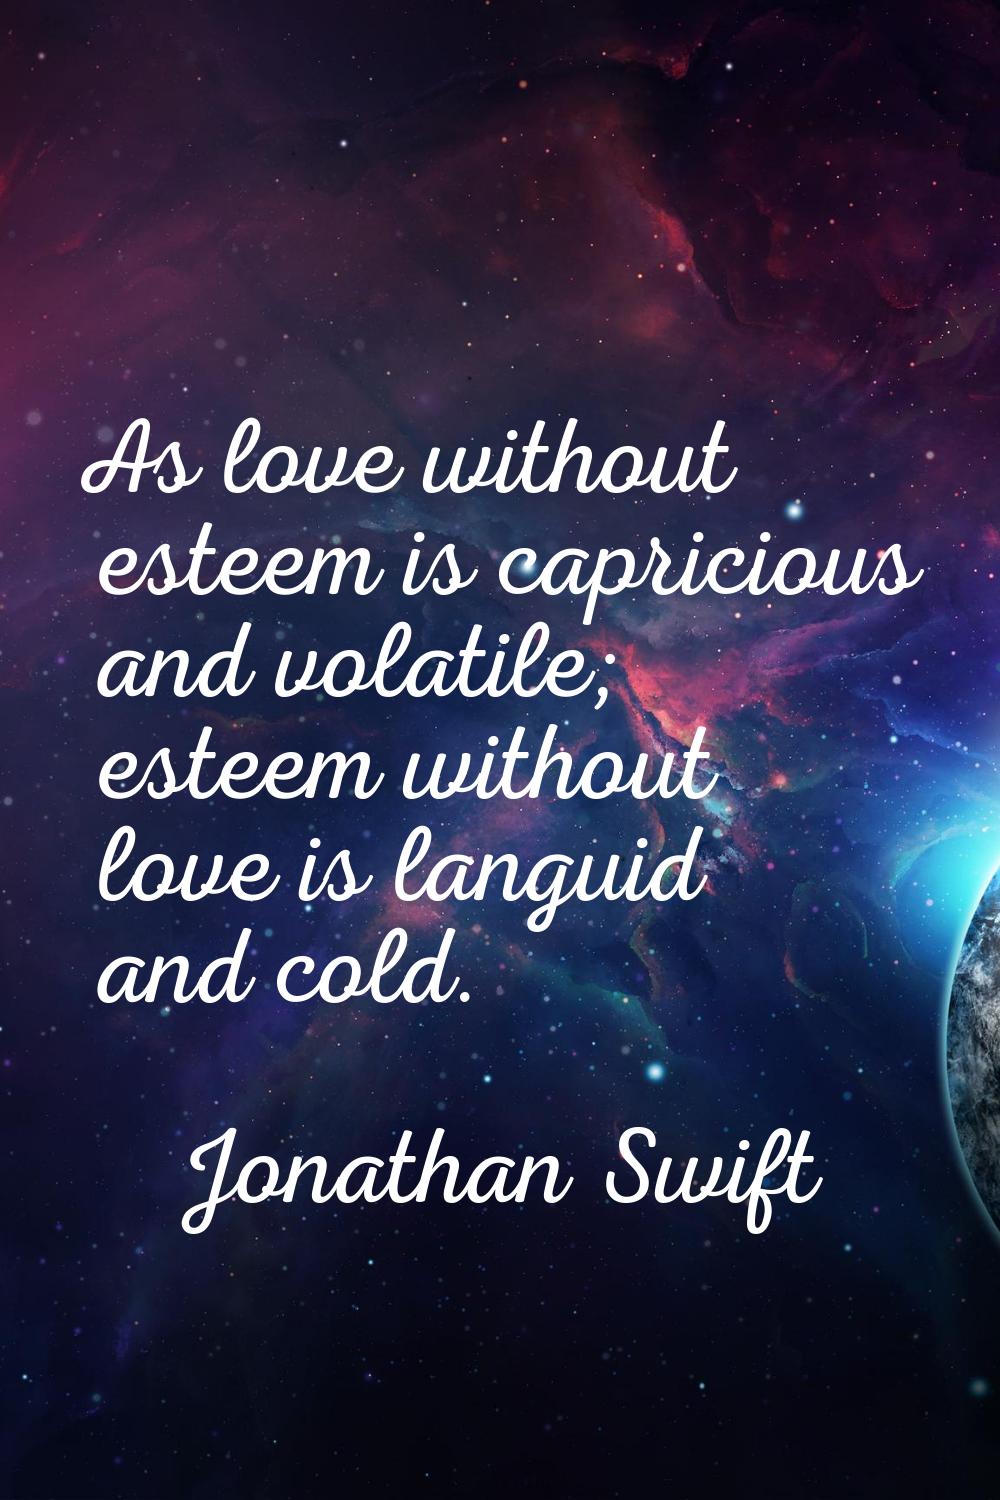 As love without esteem is capricious and volatile; esteem without love is languid and cold.